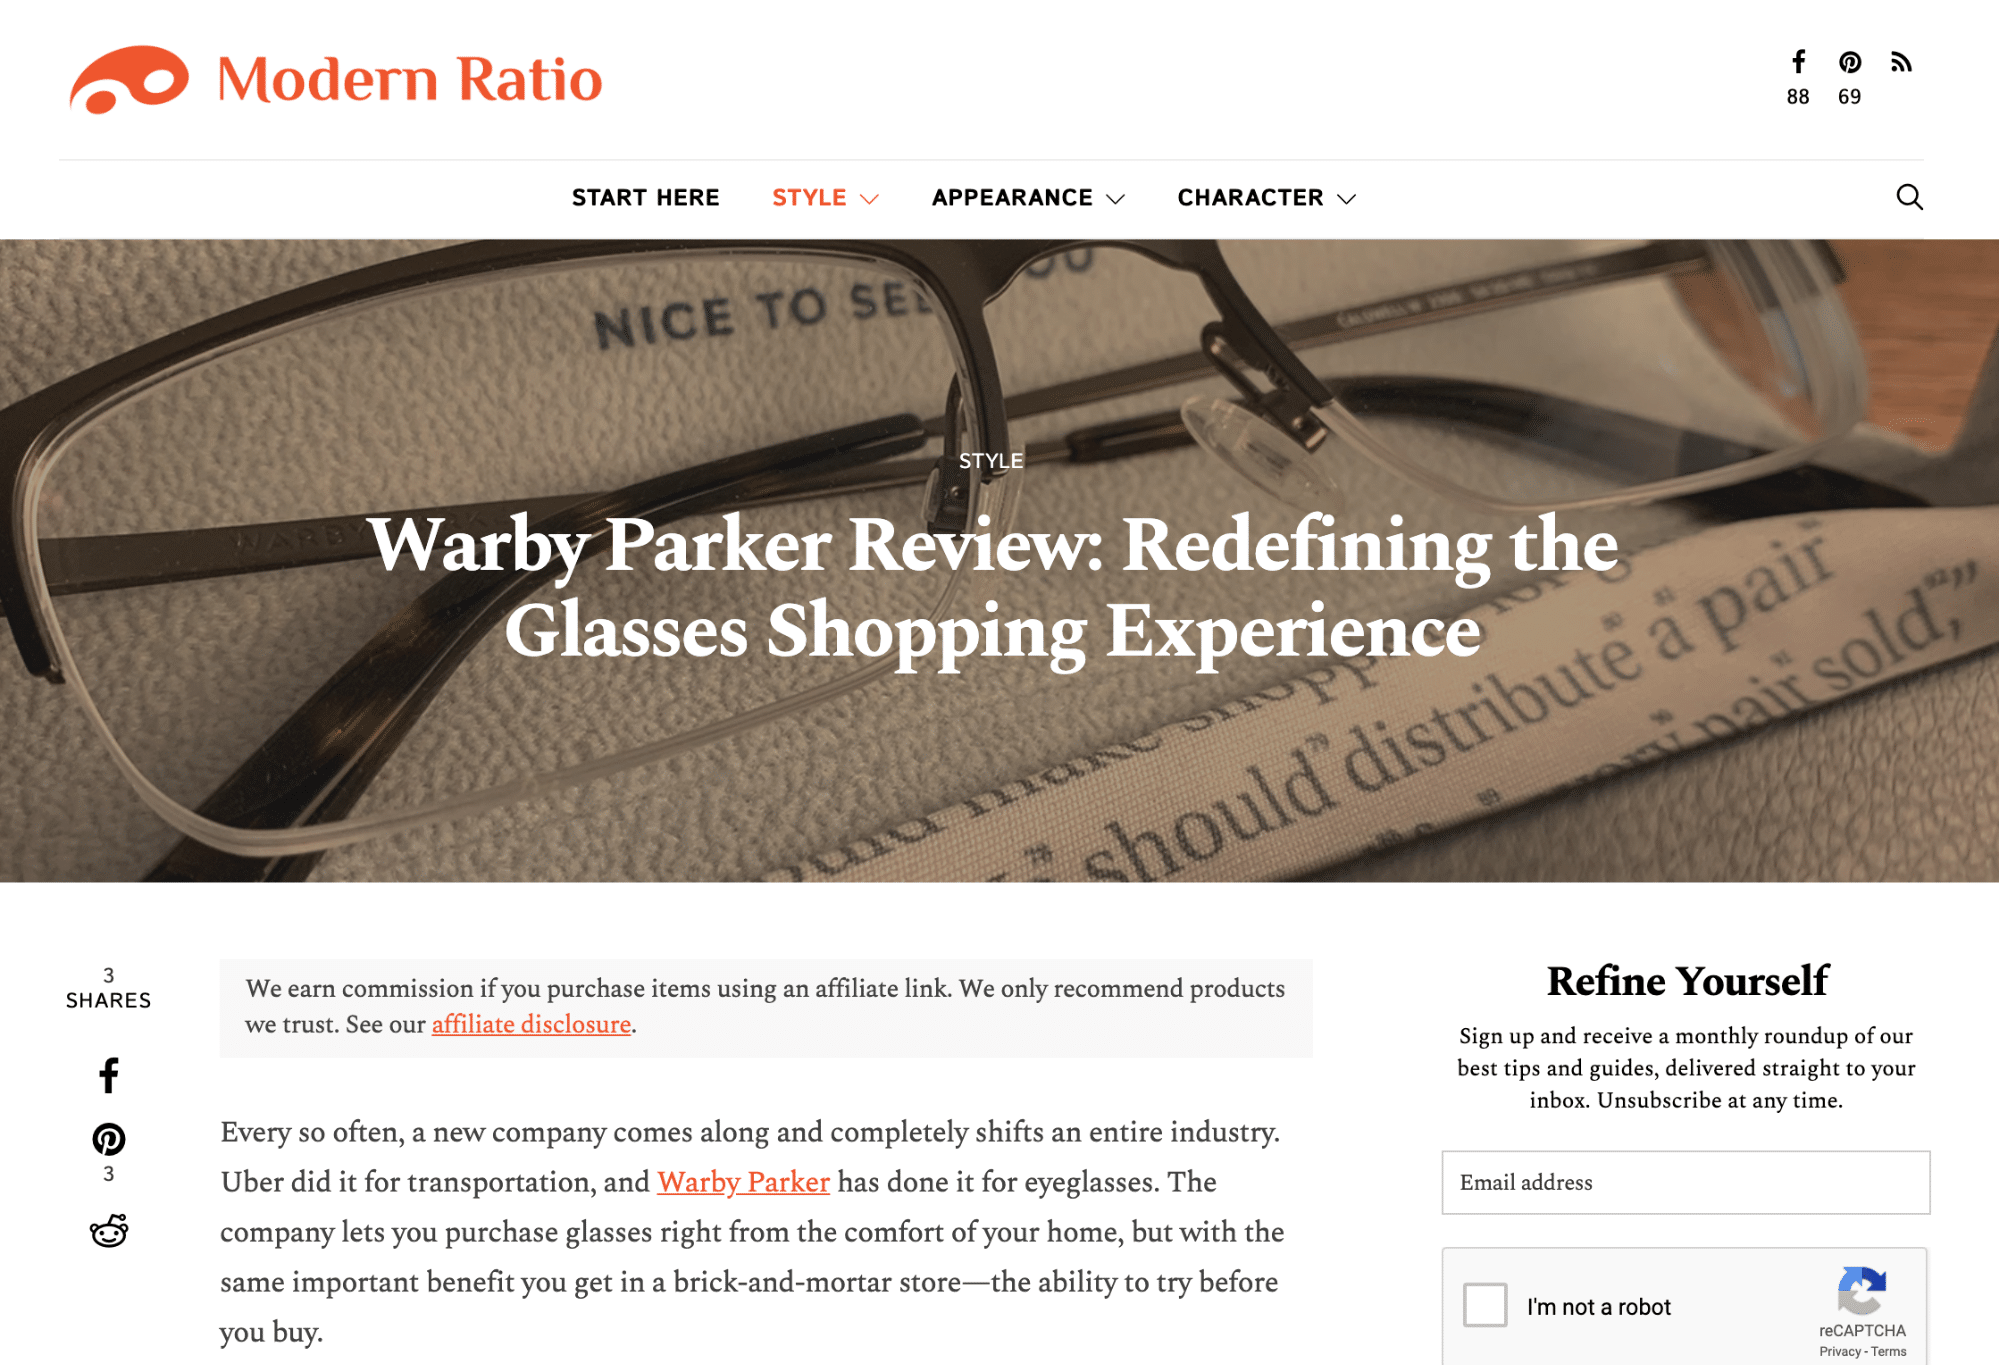 Blog post review on Warby Parker